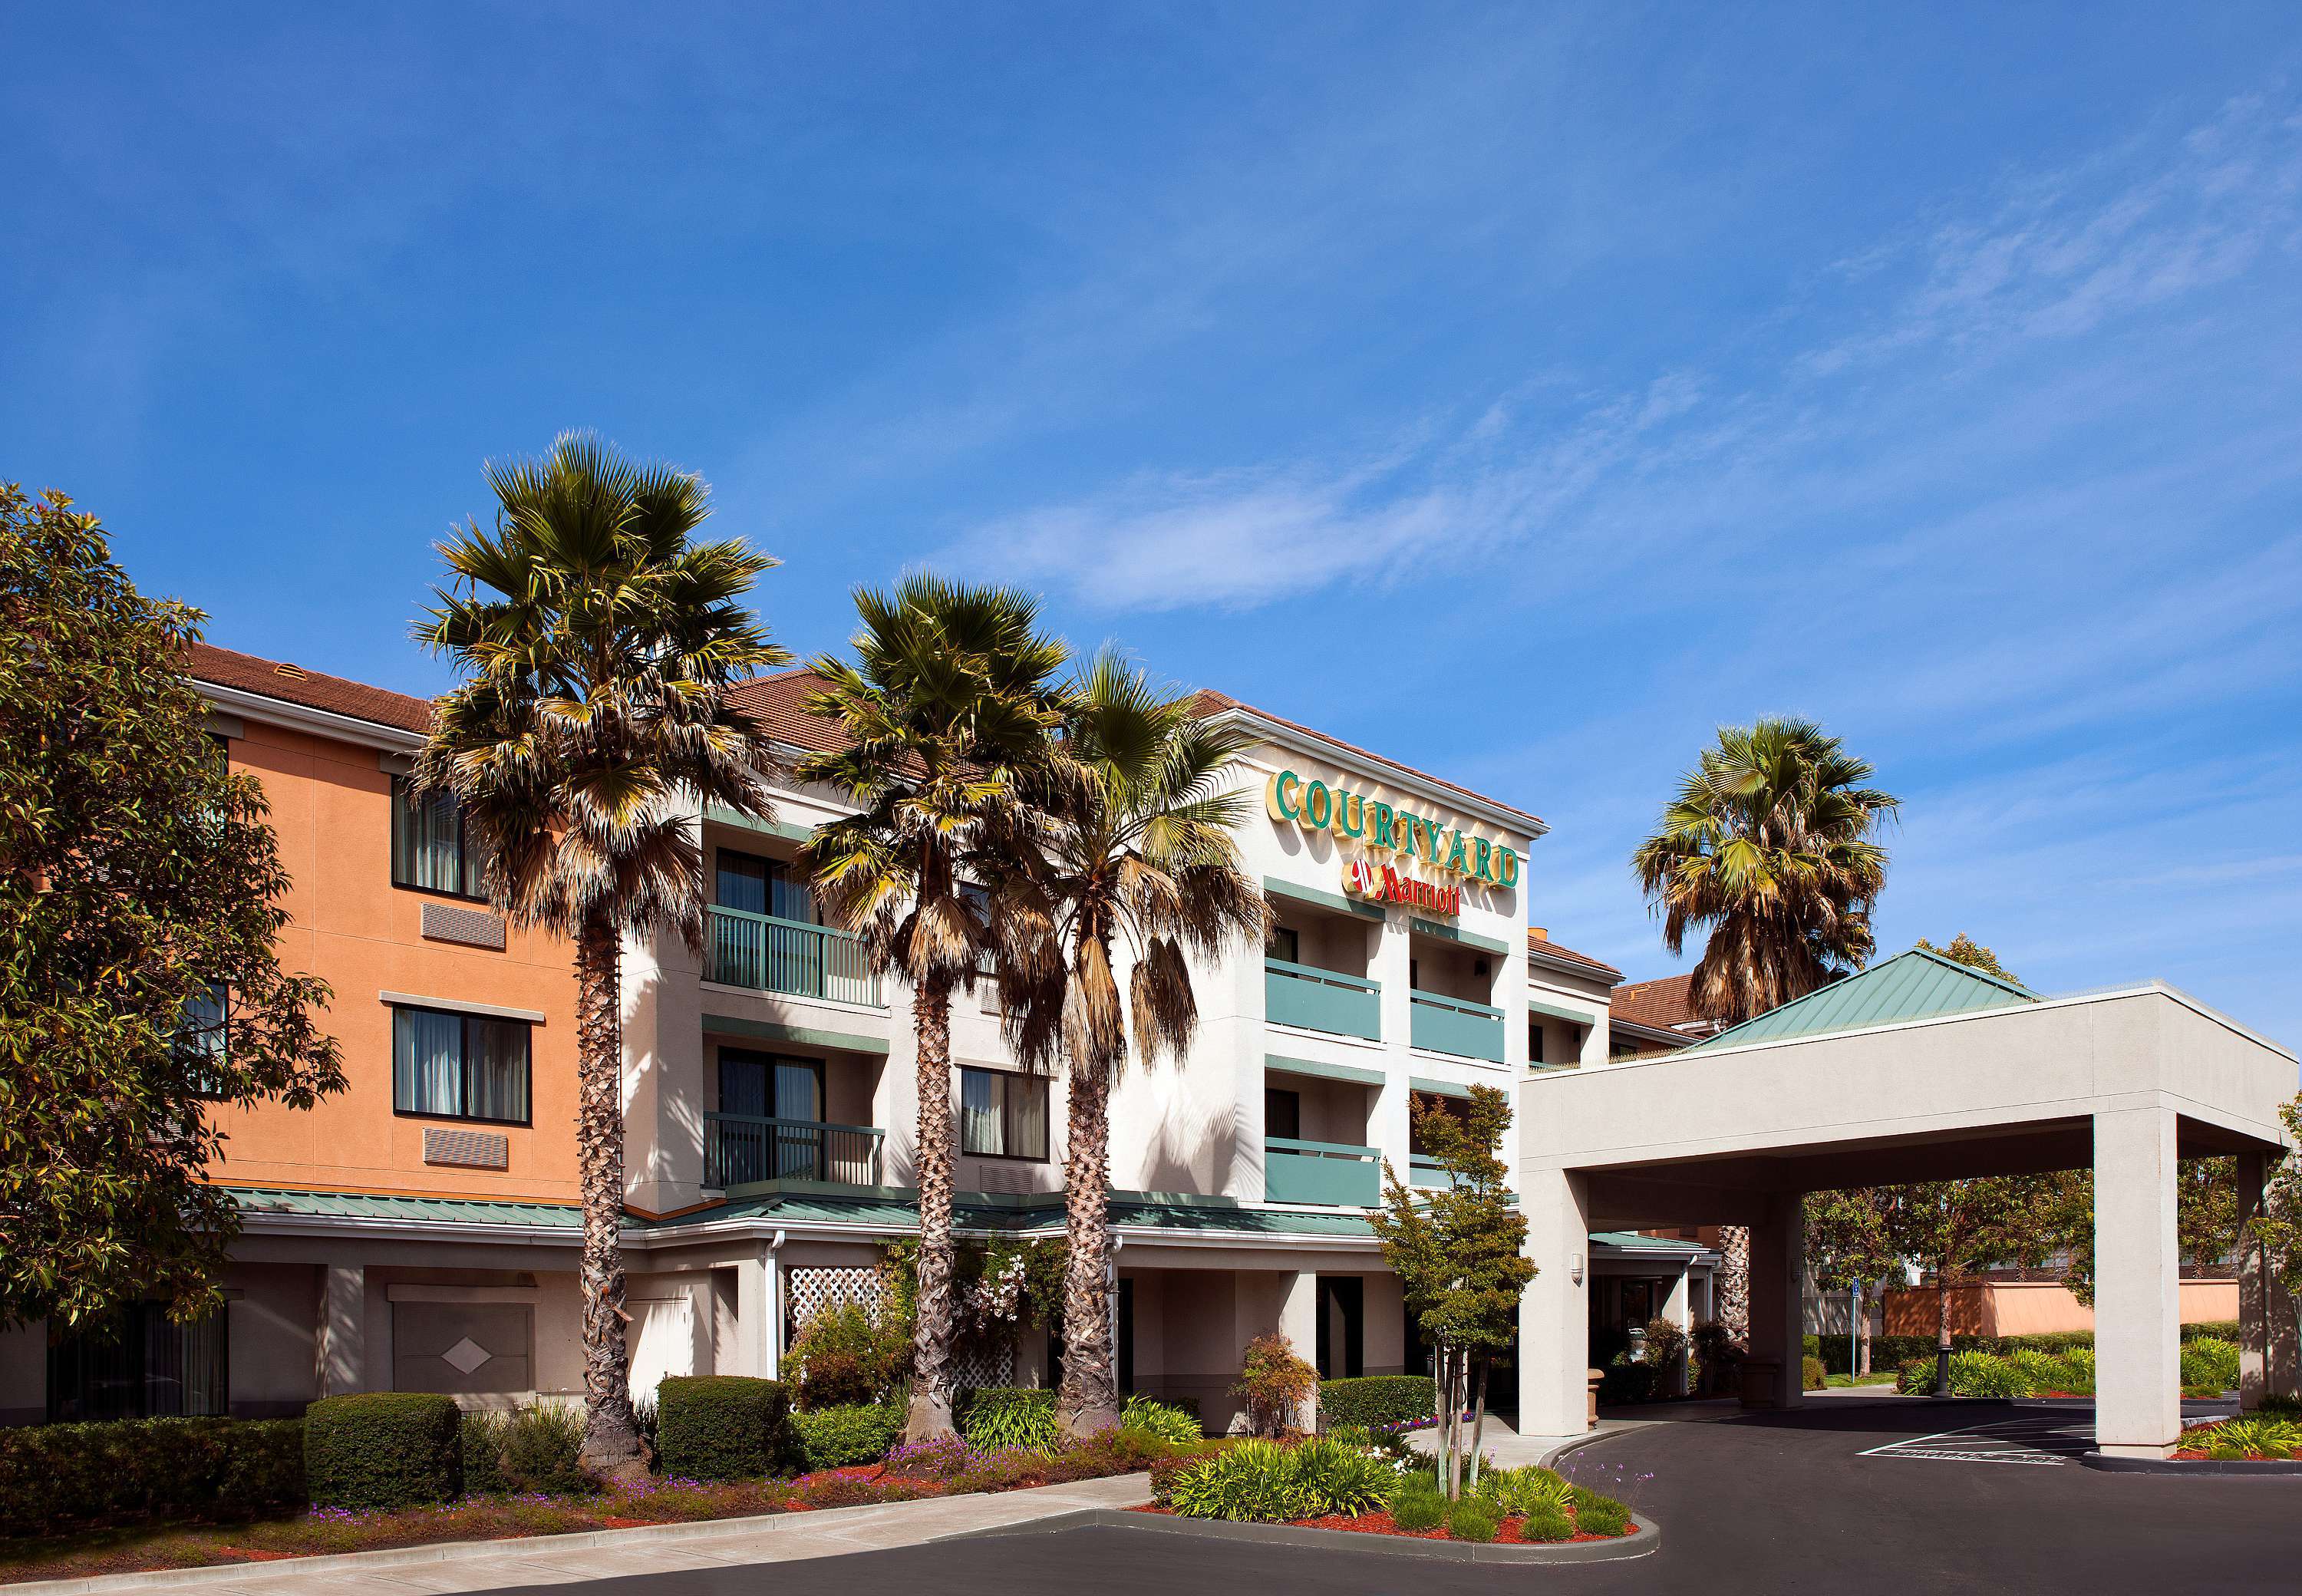 Photo of Courtyard by Marriott at Oakland Airport, Oakland, CA